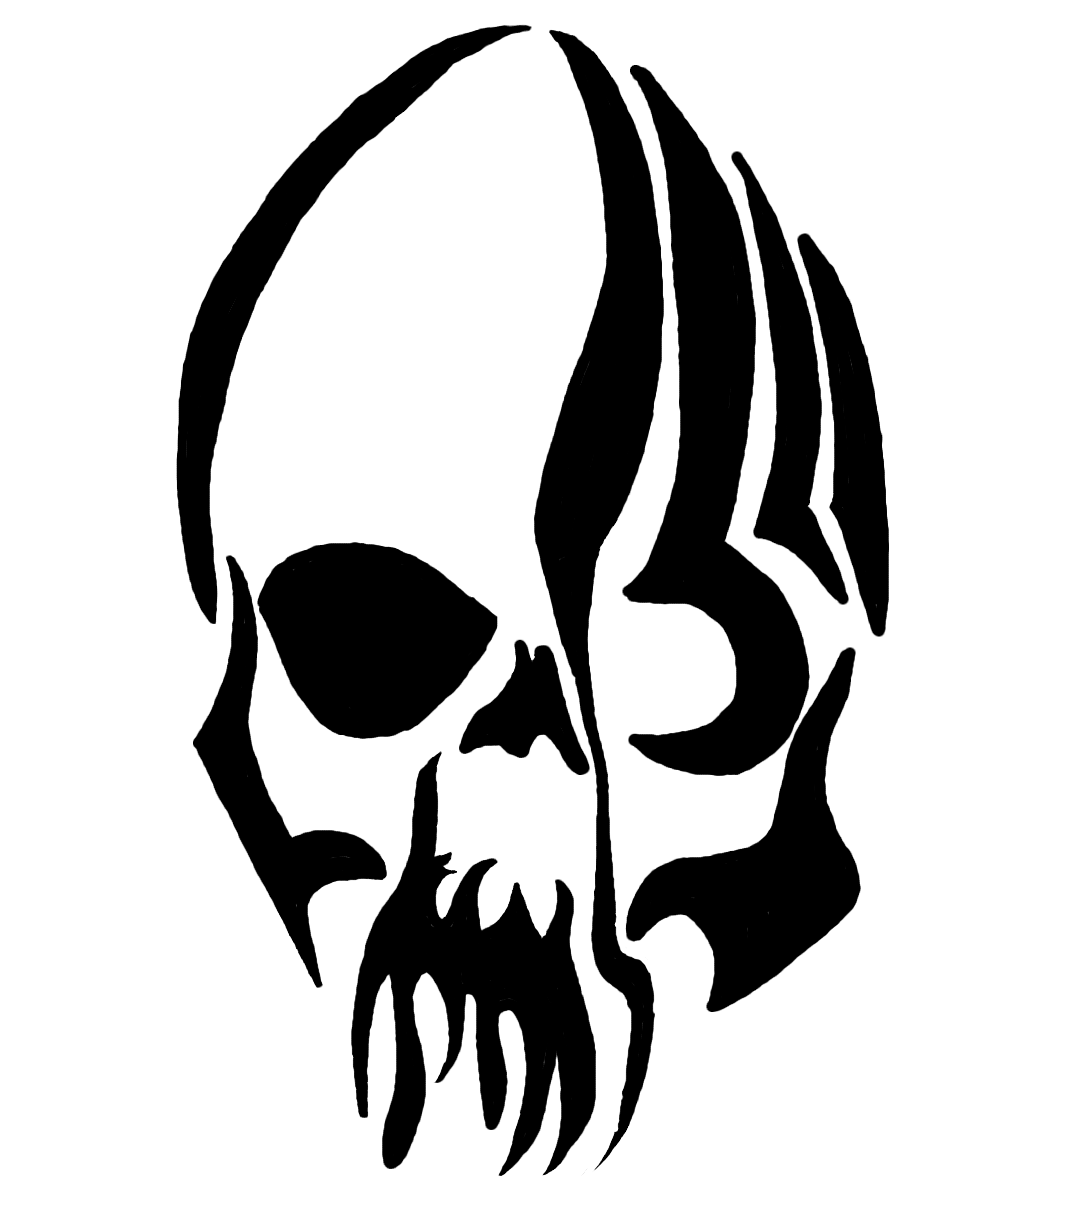 15 Sinister Skull Tattoo Designs for you to ink  The Dashing Man